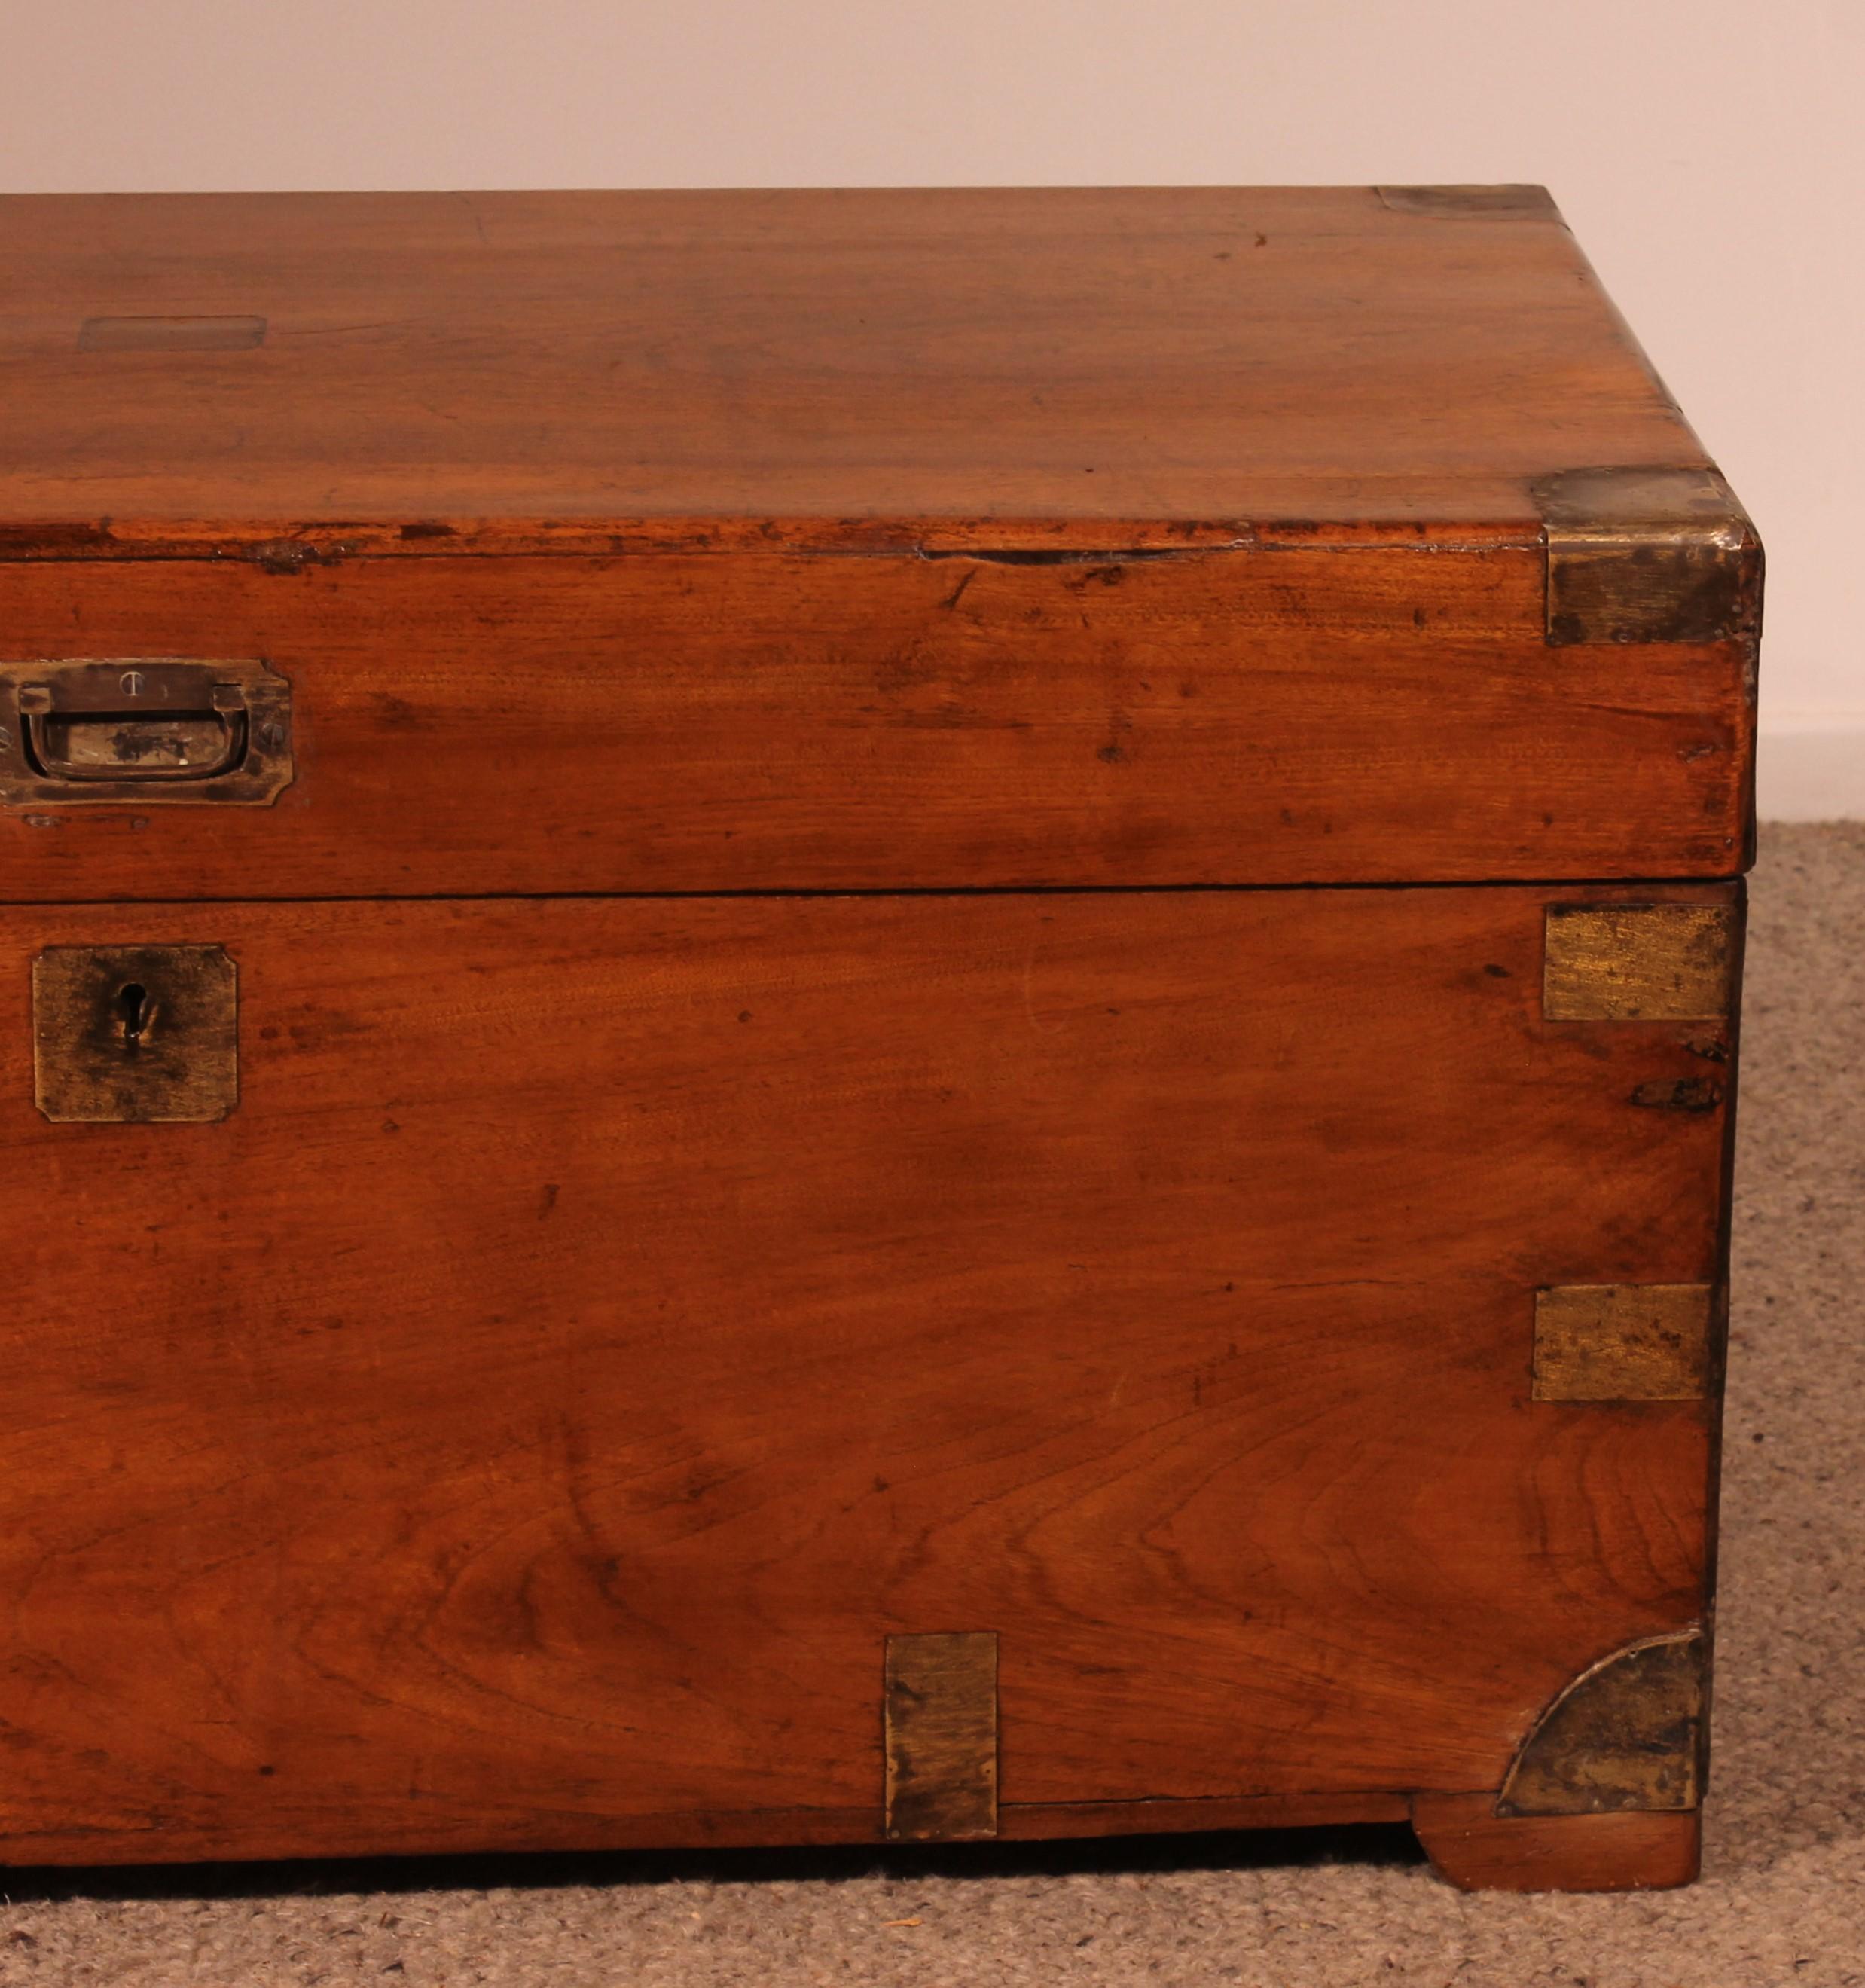 Superb large 19th century campaign chest in camphor wood with tray in camphor wood
Chest of the English navy with its fittings brasses of this style of furniture and its carrying handles on the side
Very good quality camphor wood with all sides made